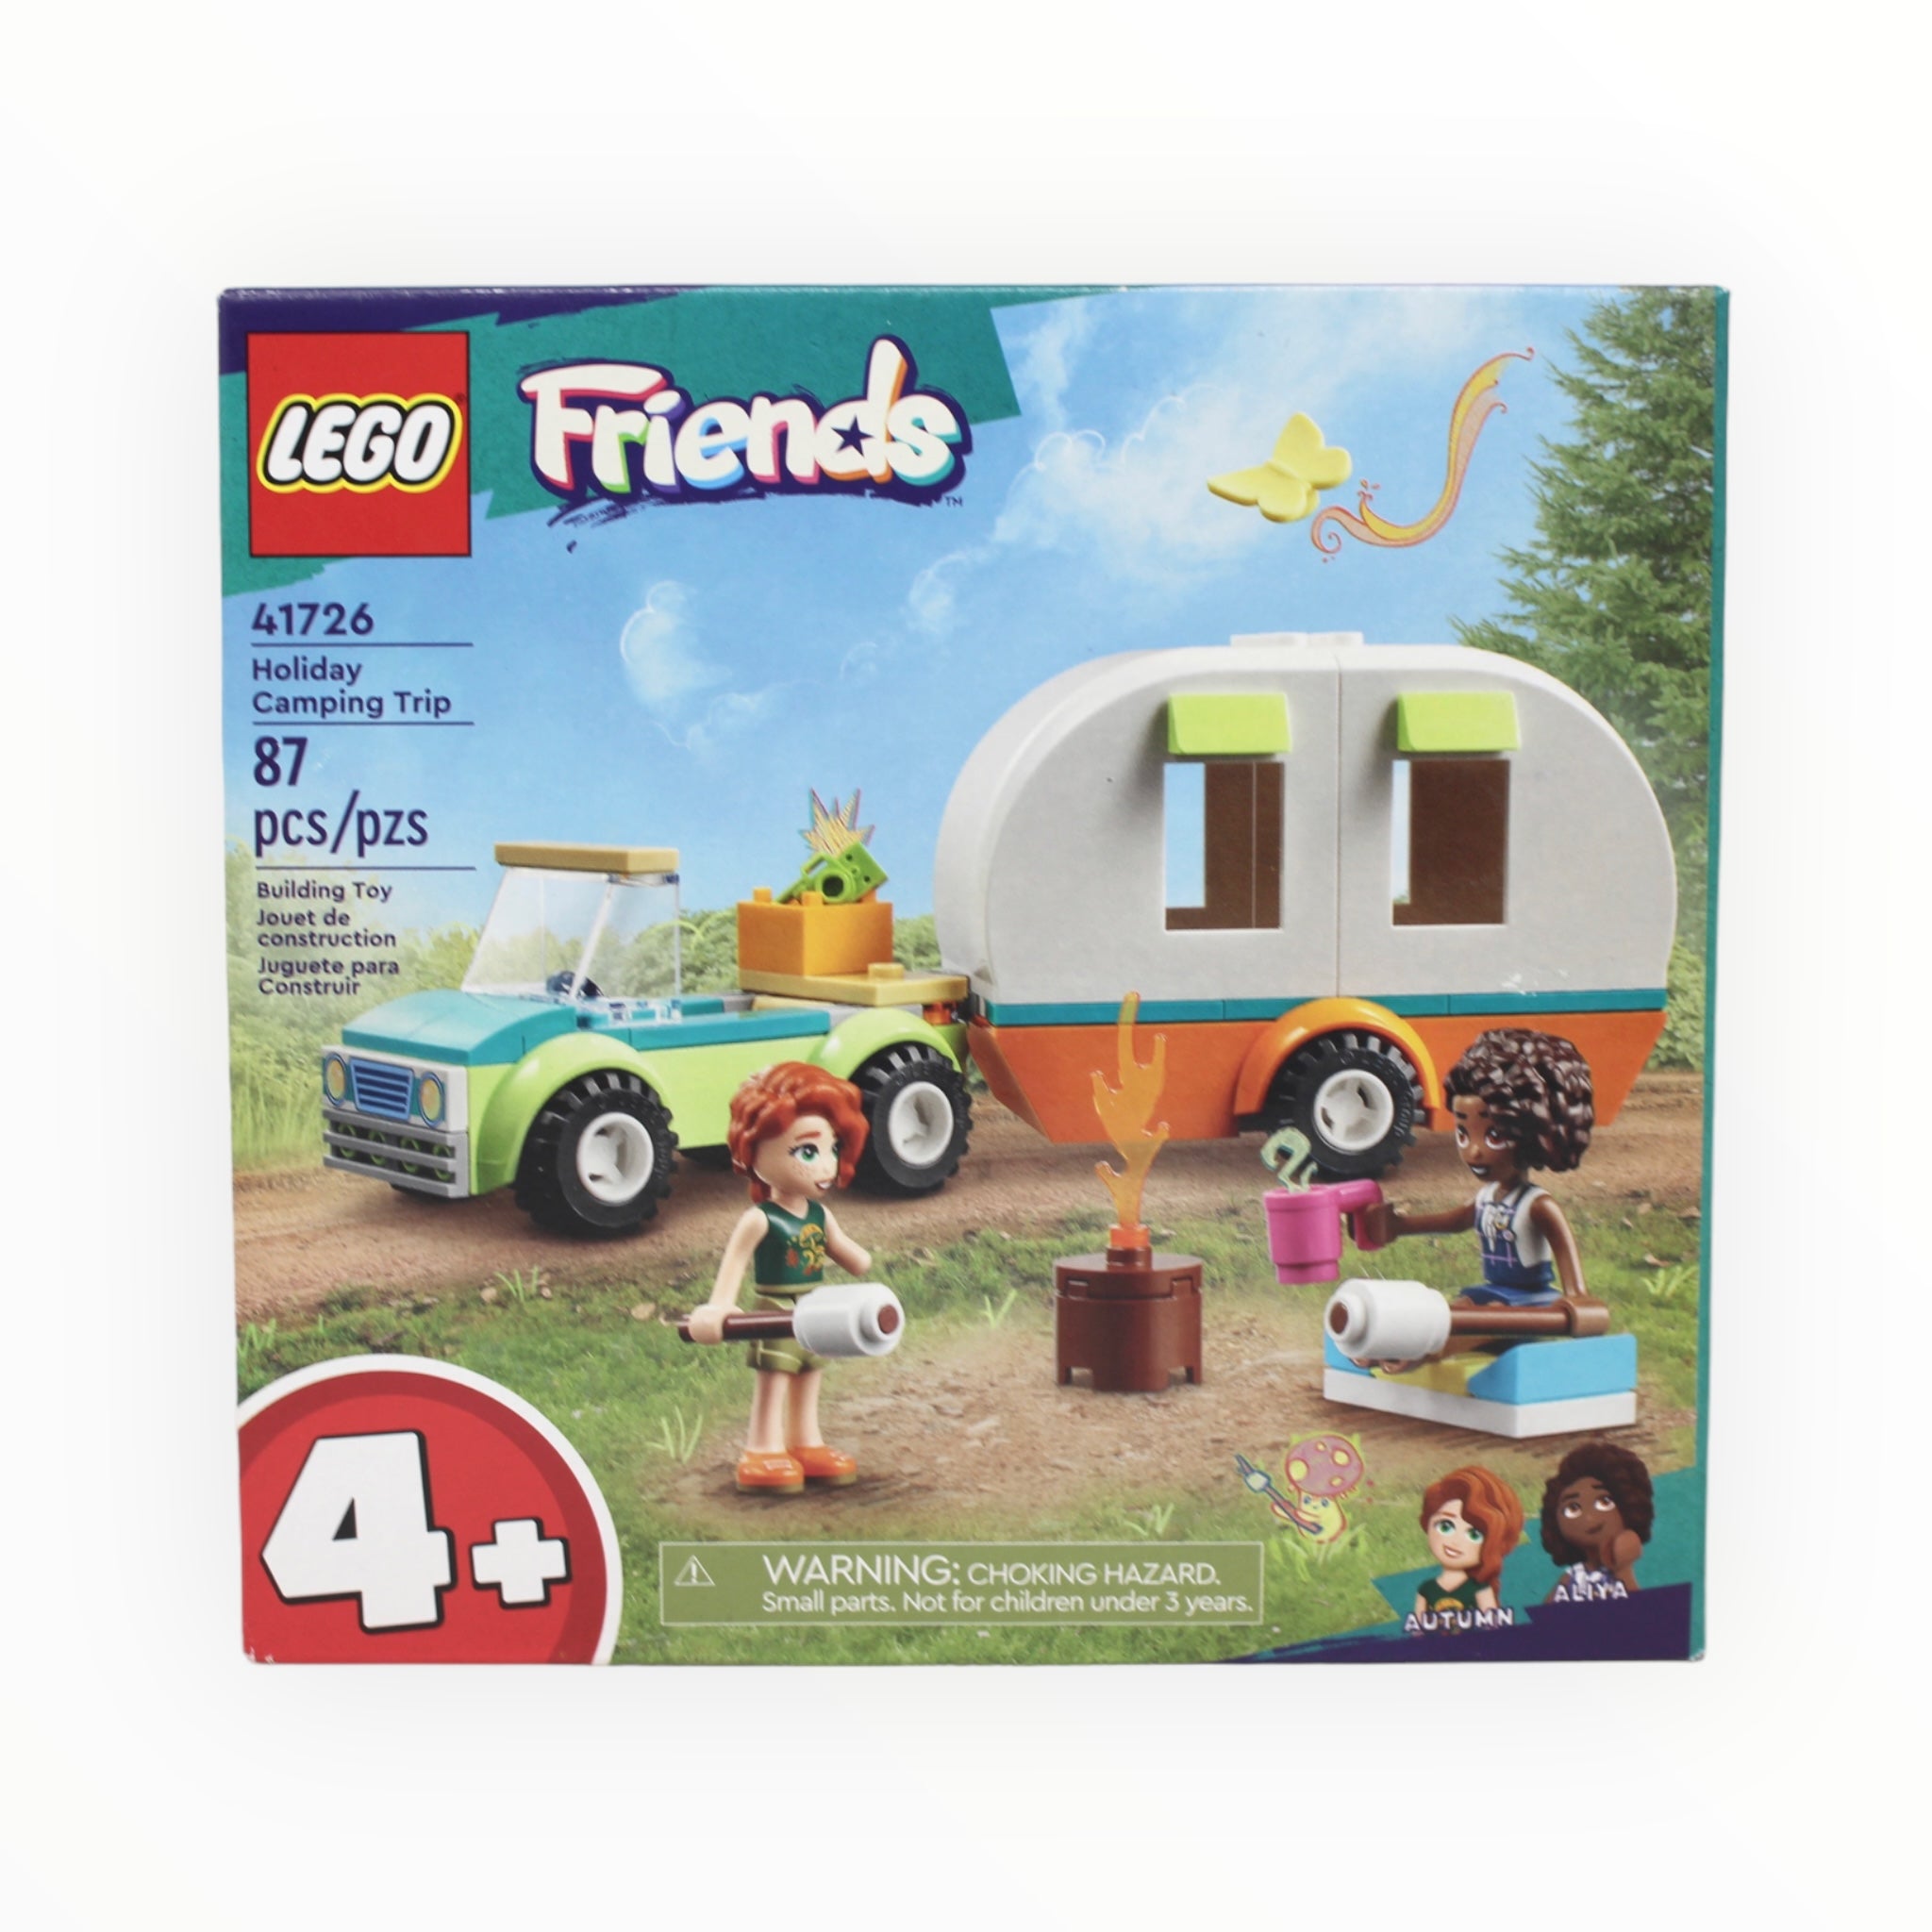 Retired Set 41726 Friends Holiday Camping Trip